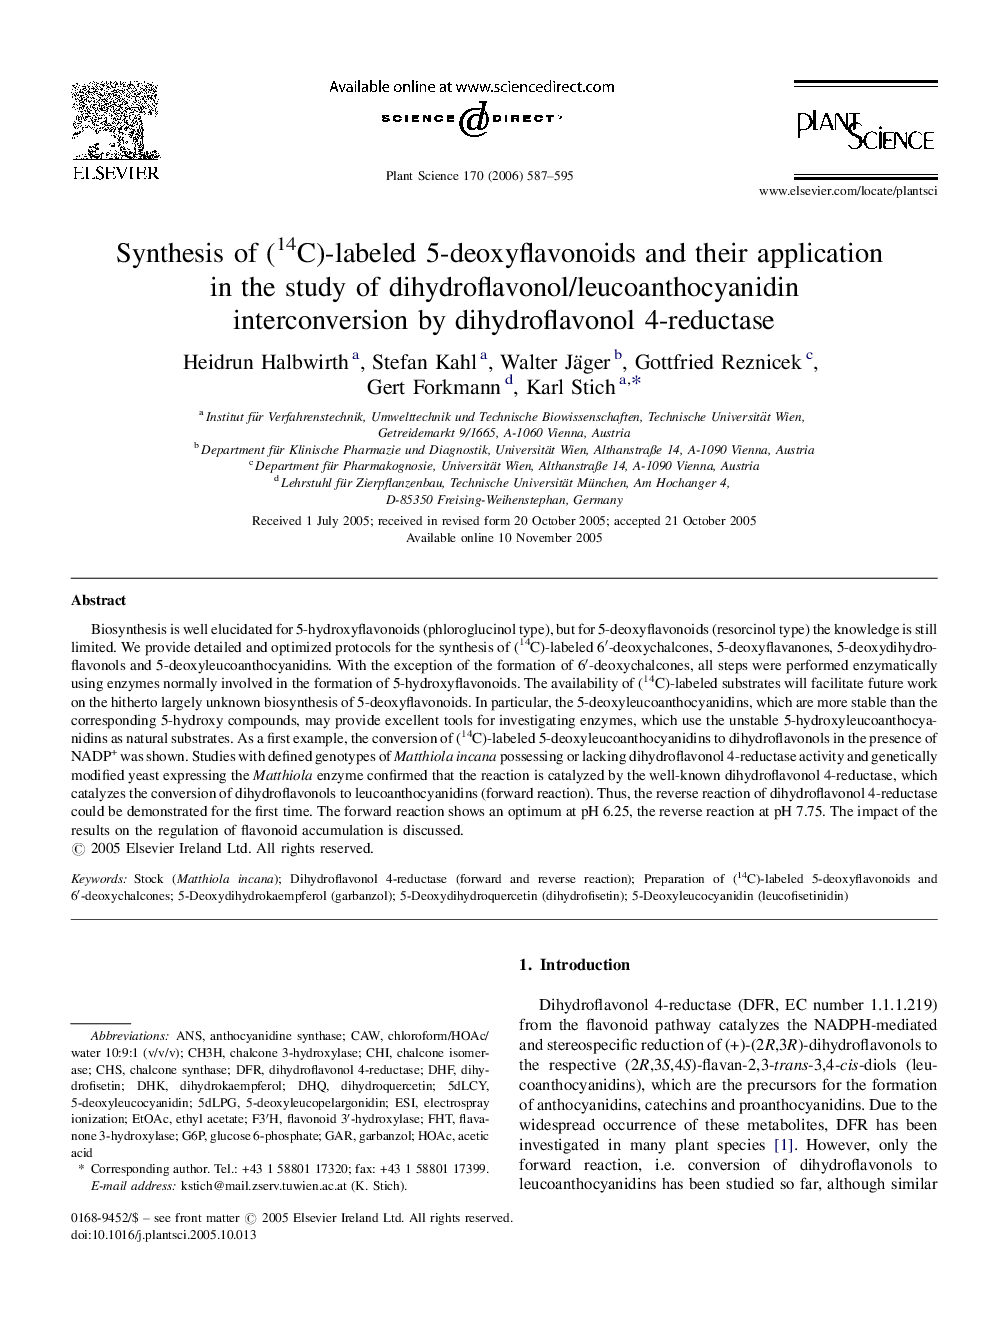 Synthesis of (14C)-labeled 5-deoxyflavonoids and their application in the study of dihydroflavonol/leucoanthocyanidin interconversion by dihydroflavonol 4-reductase